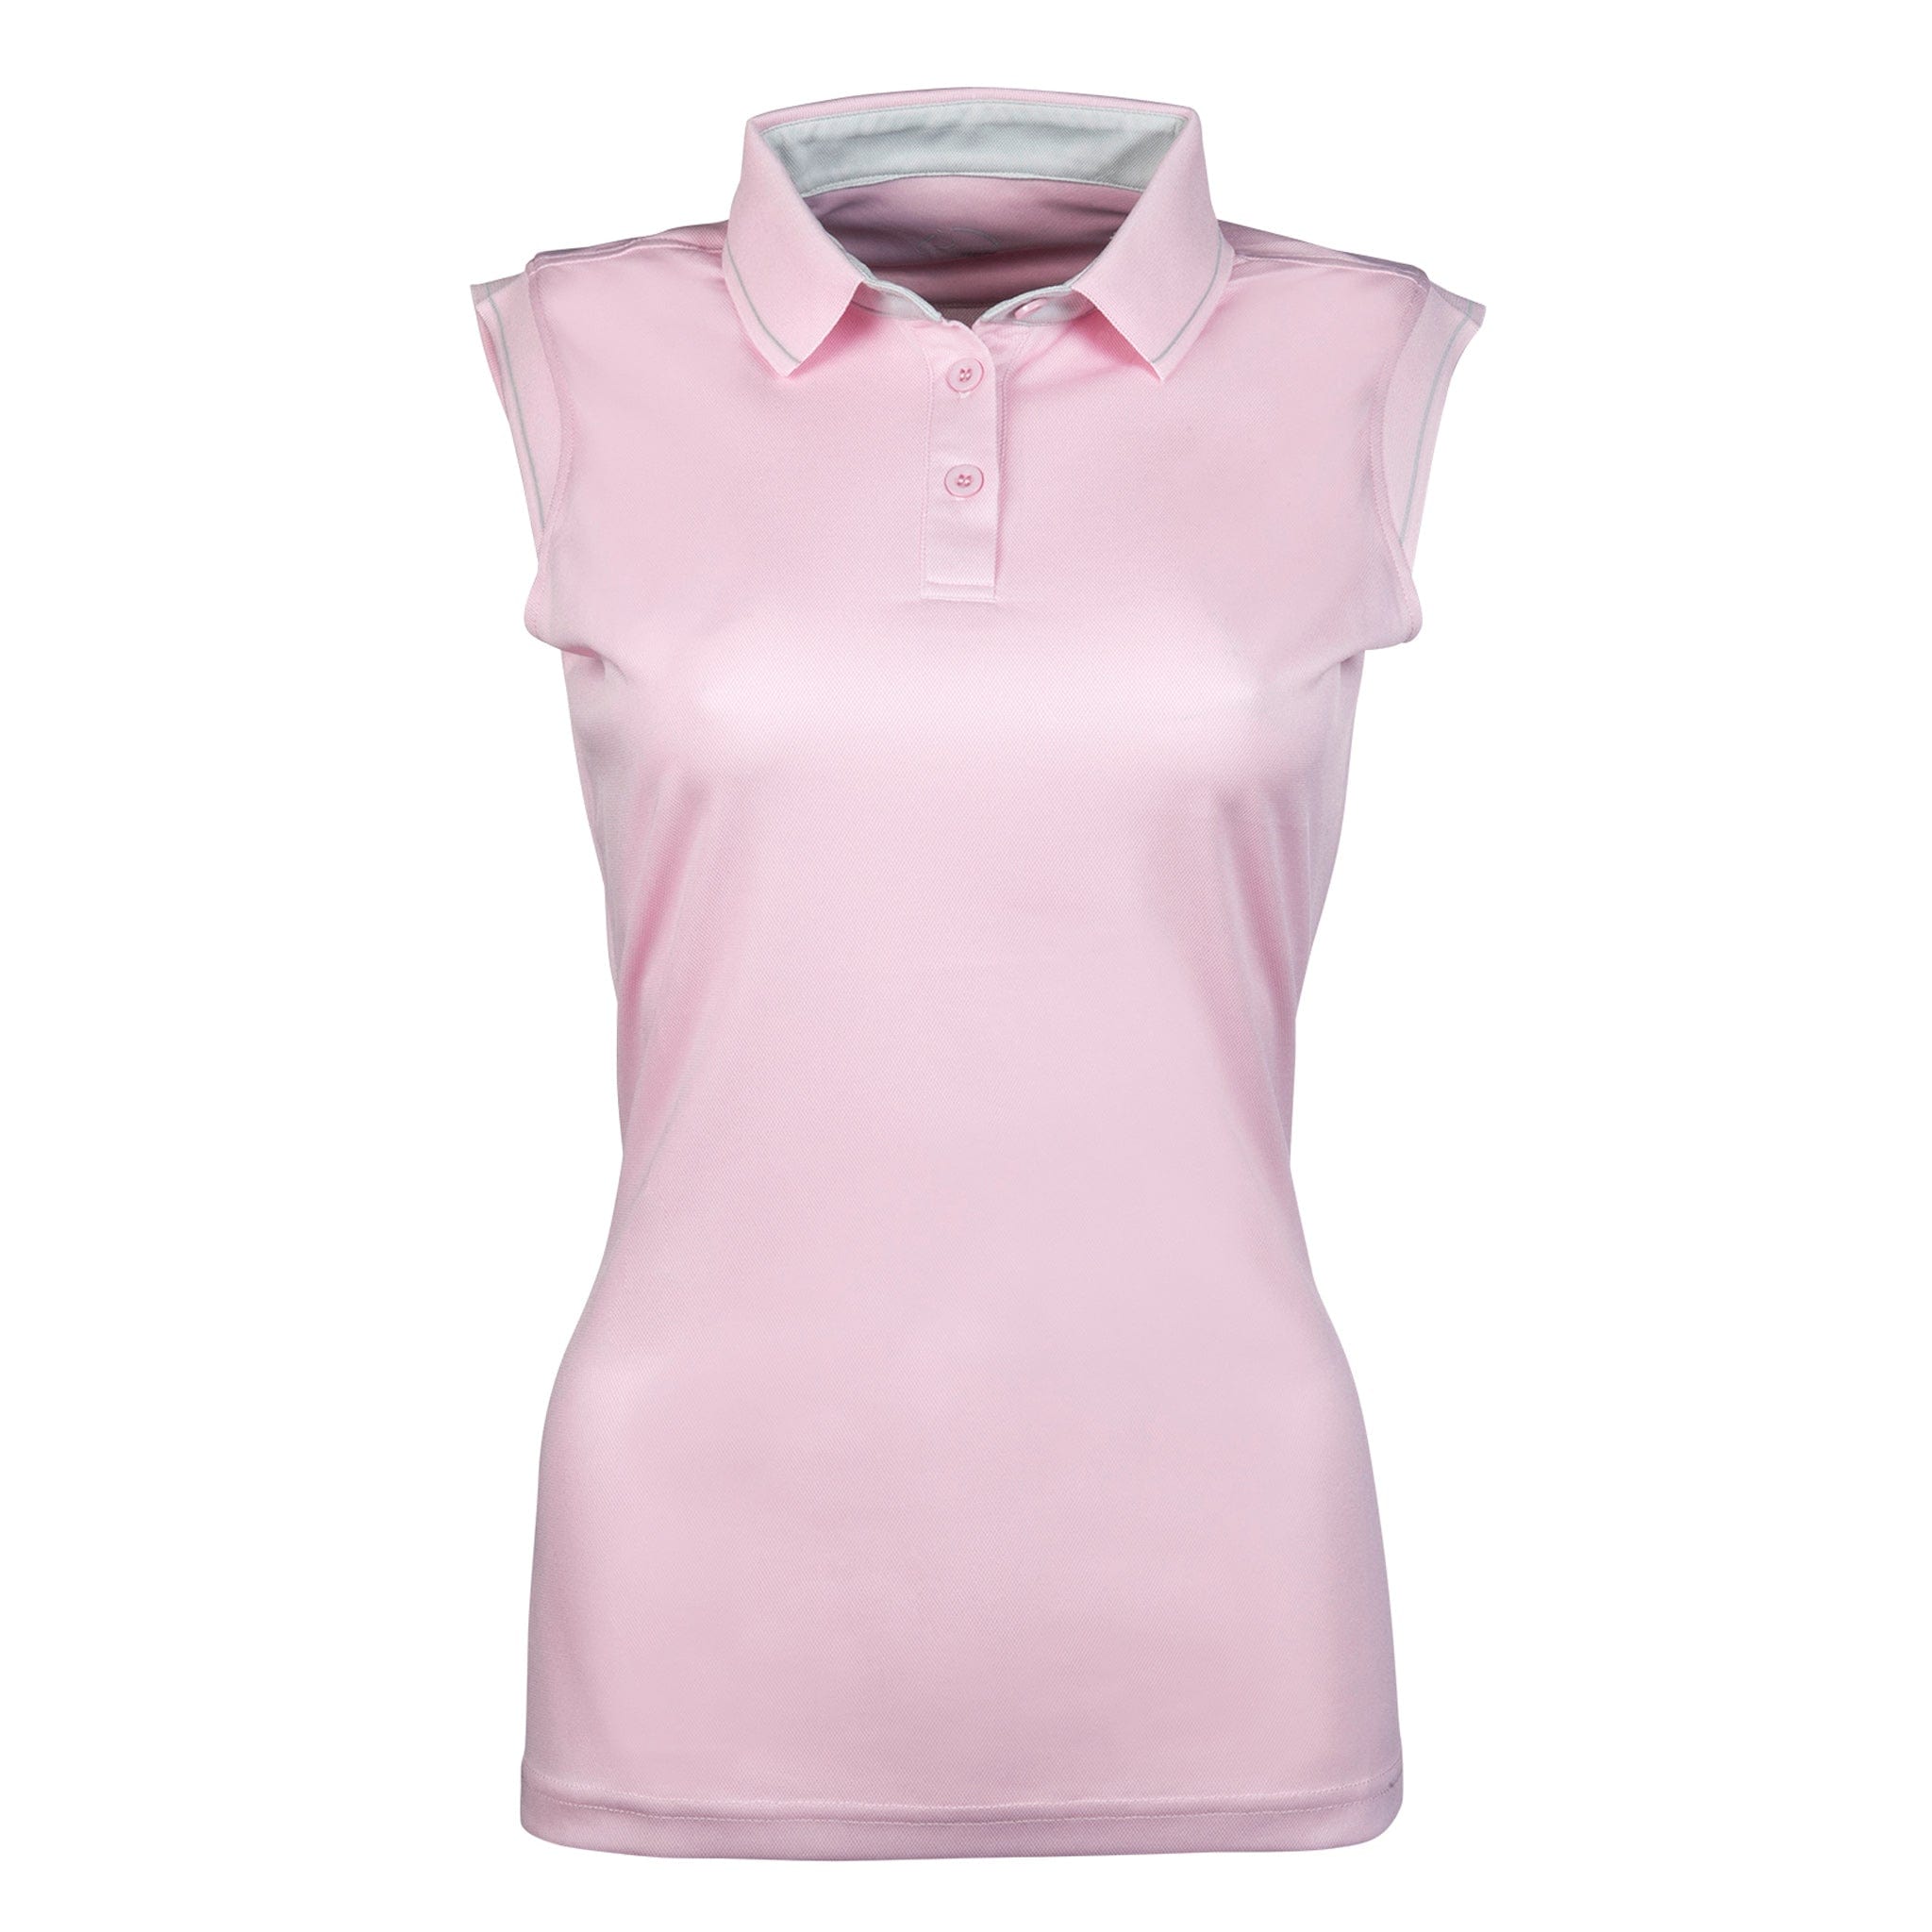 HKM Classico Sleeveless Polo Shirt 12703 Light Pink Front